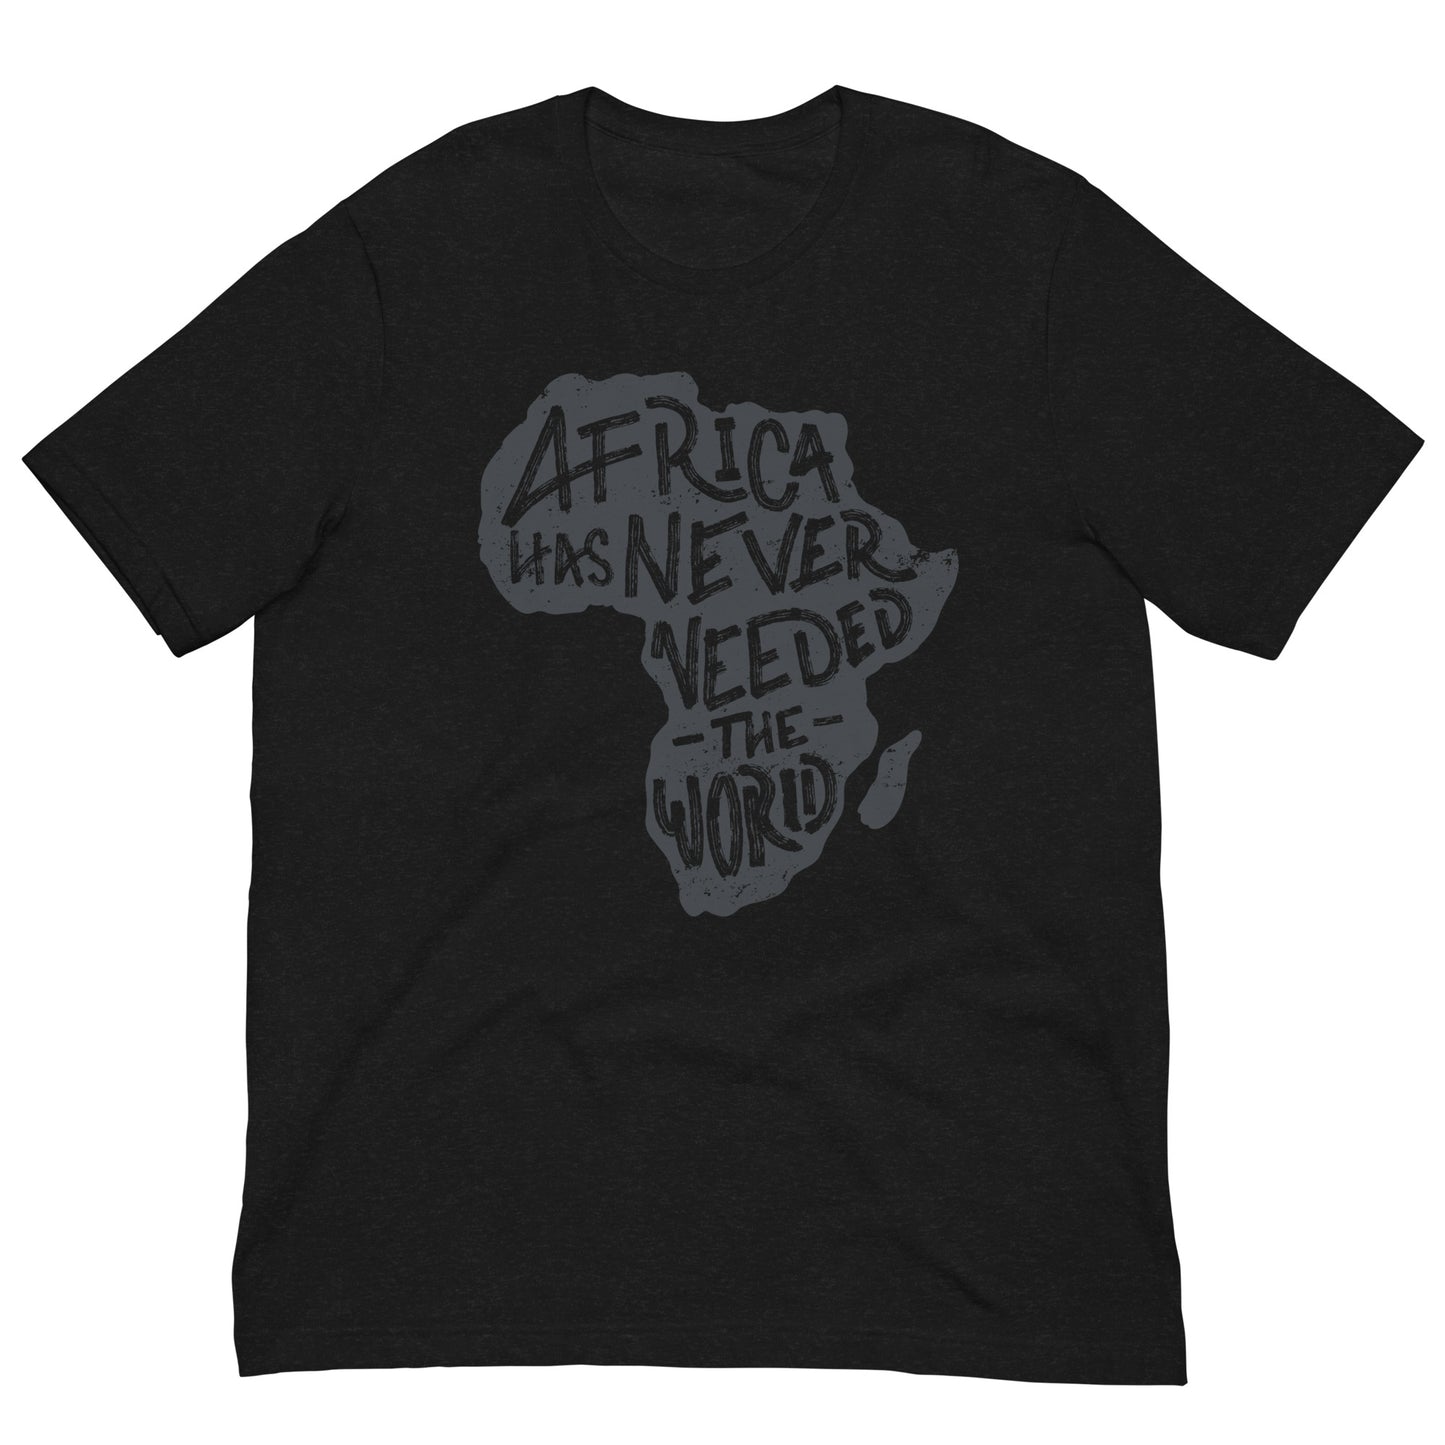 Africa Has Never Needed The World Black History Month Graphic Tee Shirt Bella + Canvas Unisex Short Sleeve T-Shirt